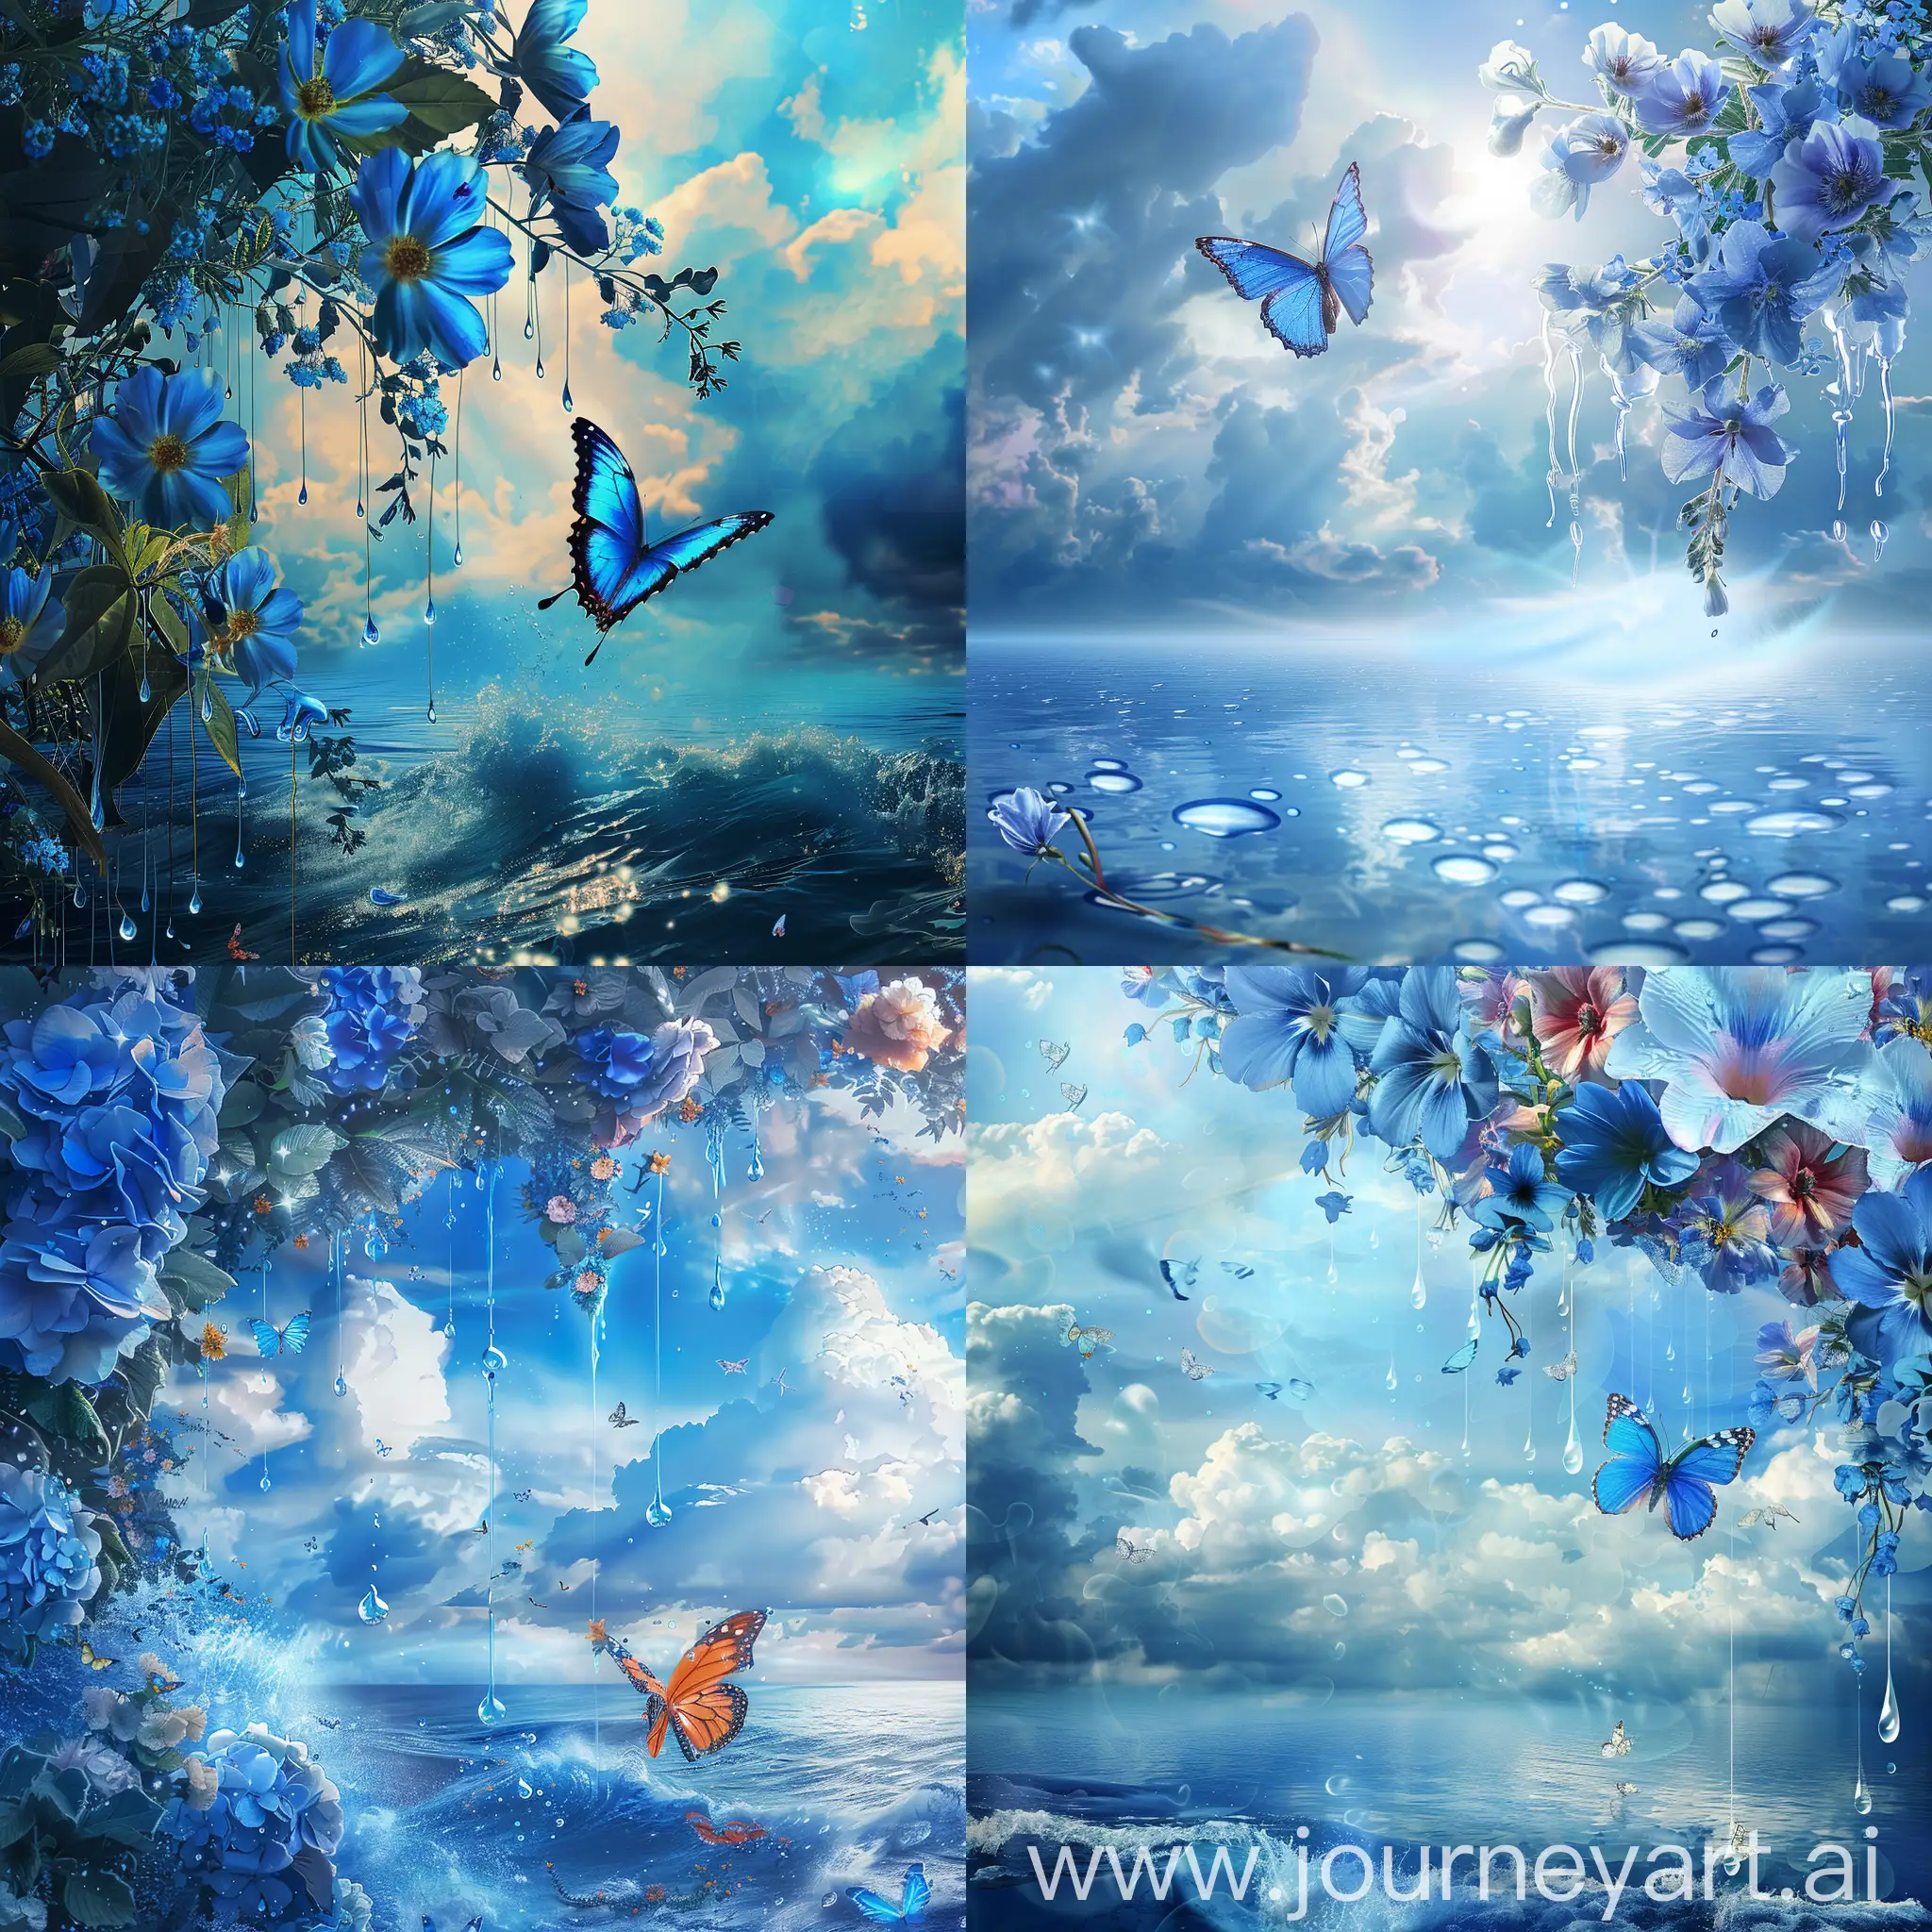 A world where everything is blue and beautiful with flowers butterfly, sky ocean and tears of sadness
